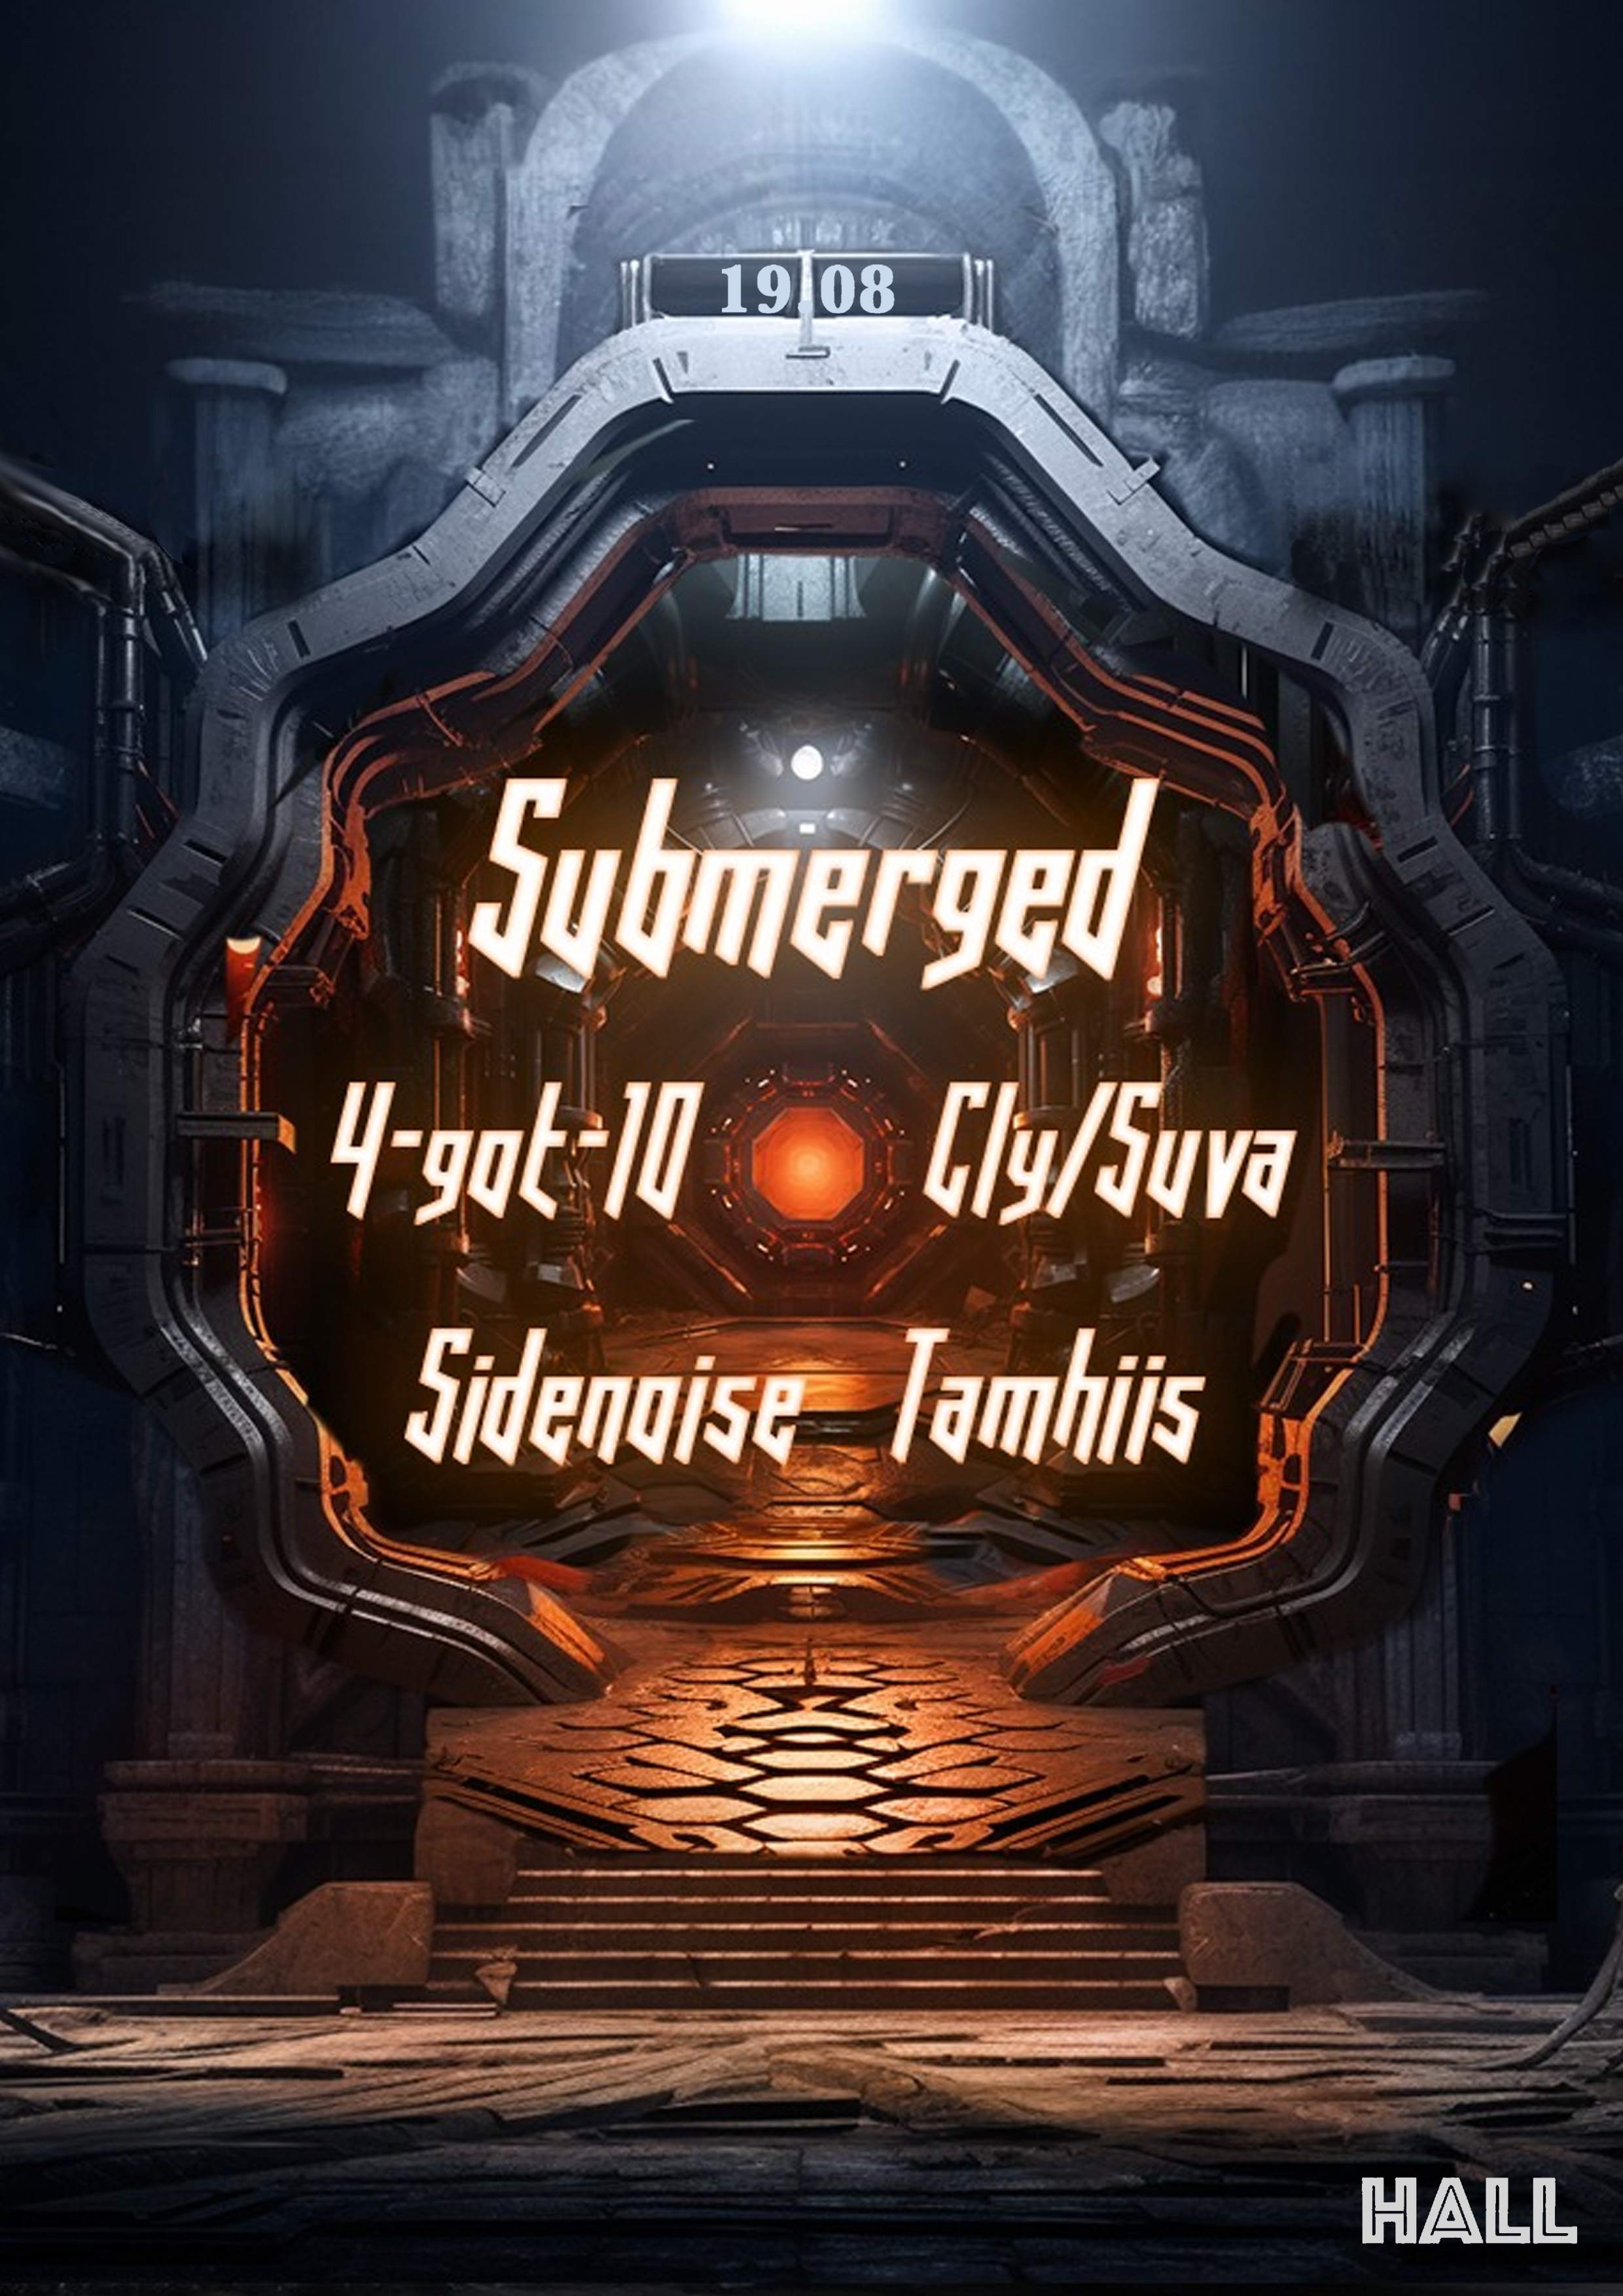 Beats From The Vault presents: Submerged (DJ-set), Tamhiis, Cly/Suva, 4-got-10 & Sidenoise - フライヤー表